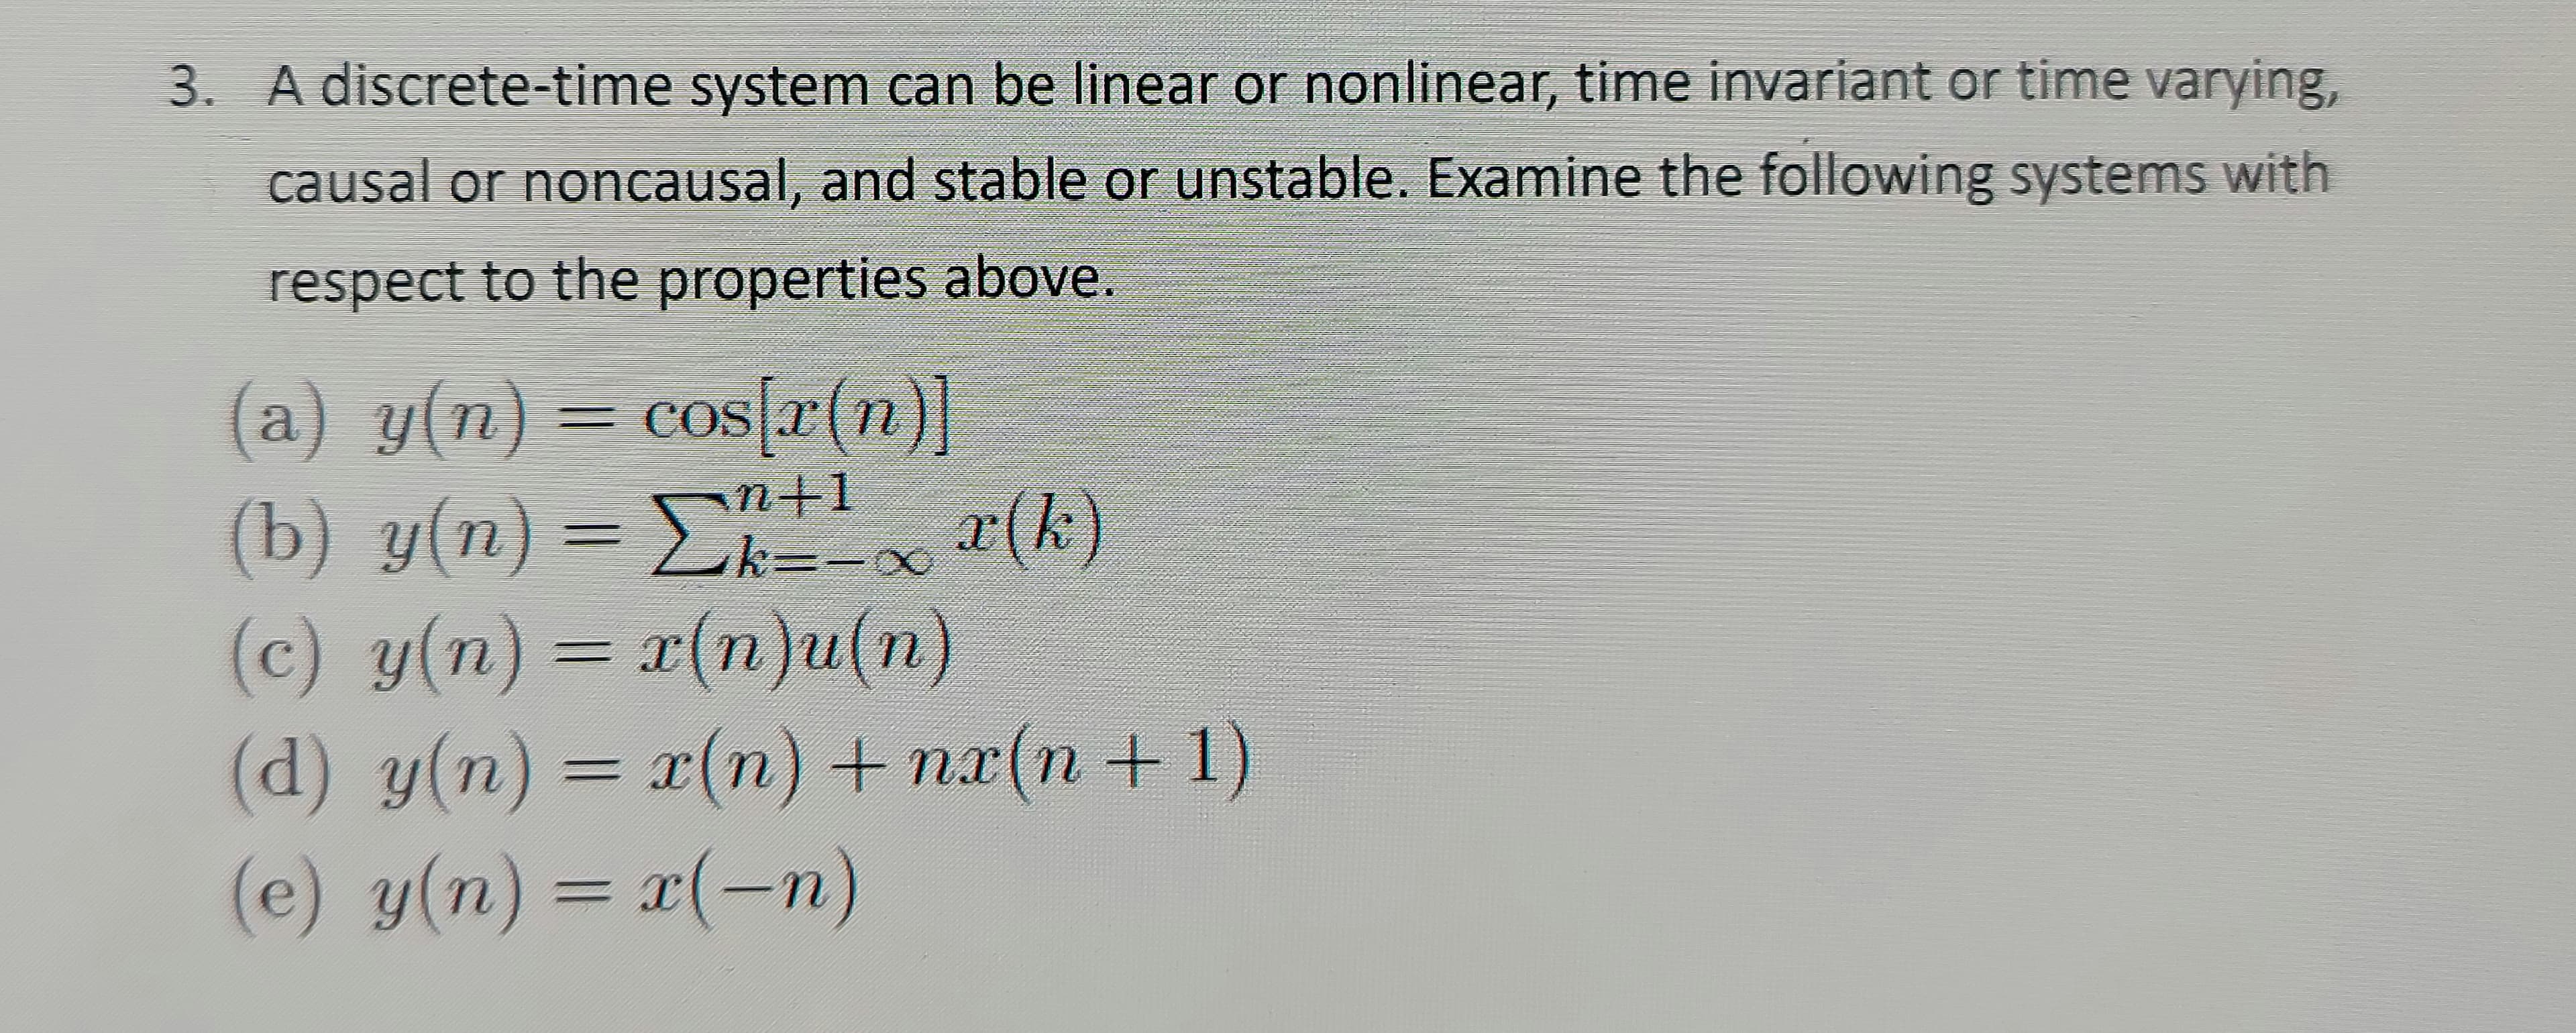 3. A discrete-time system can be linear or nonlinear, time invariant or time varying,
causal or noncausal, and stable or unstable. Examine the following systems with
respect to the properties above.
(a) y(n)= cos[r(n)]
(b) y(n) = E r(k)
(c) y(n) = r(n)u(n)
(d) y(n) = x(n) + nx(n +1)
(e) y(n) = x(-n)
COS
cos r(n)
k=D-
